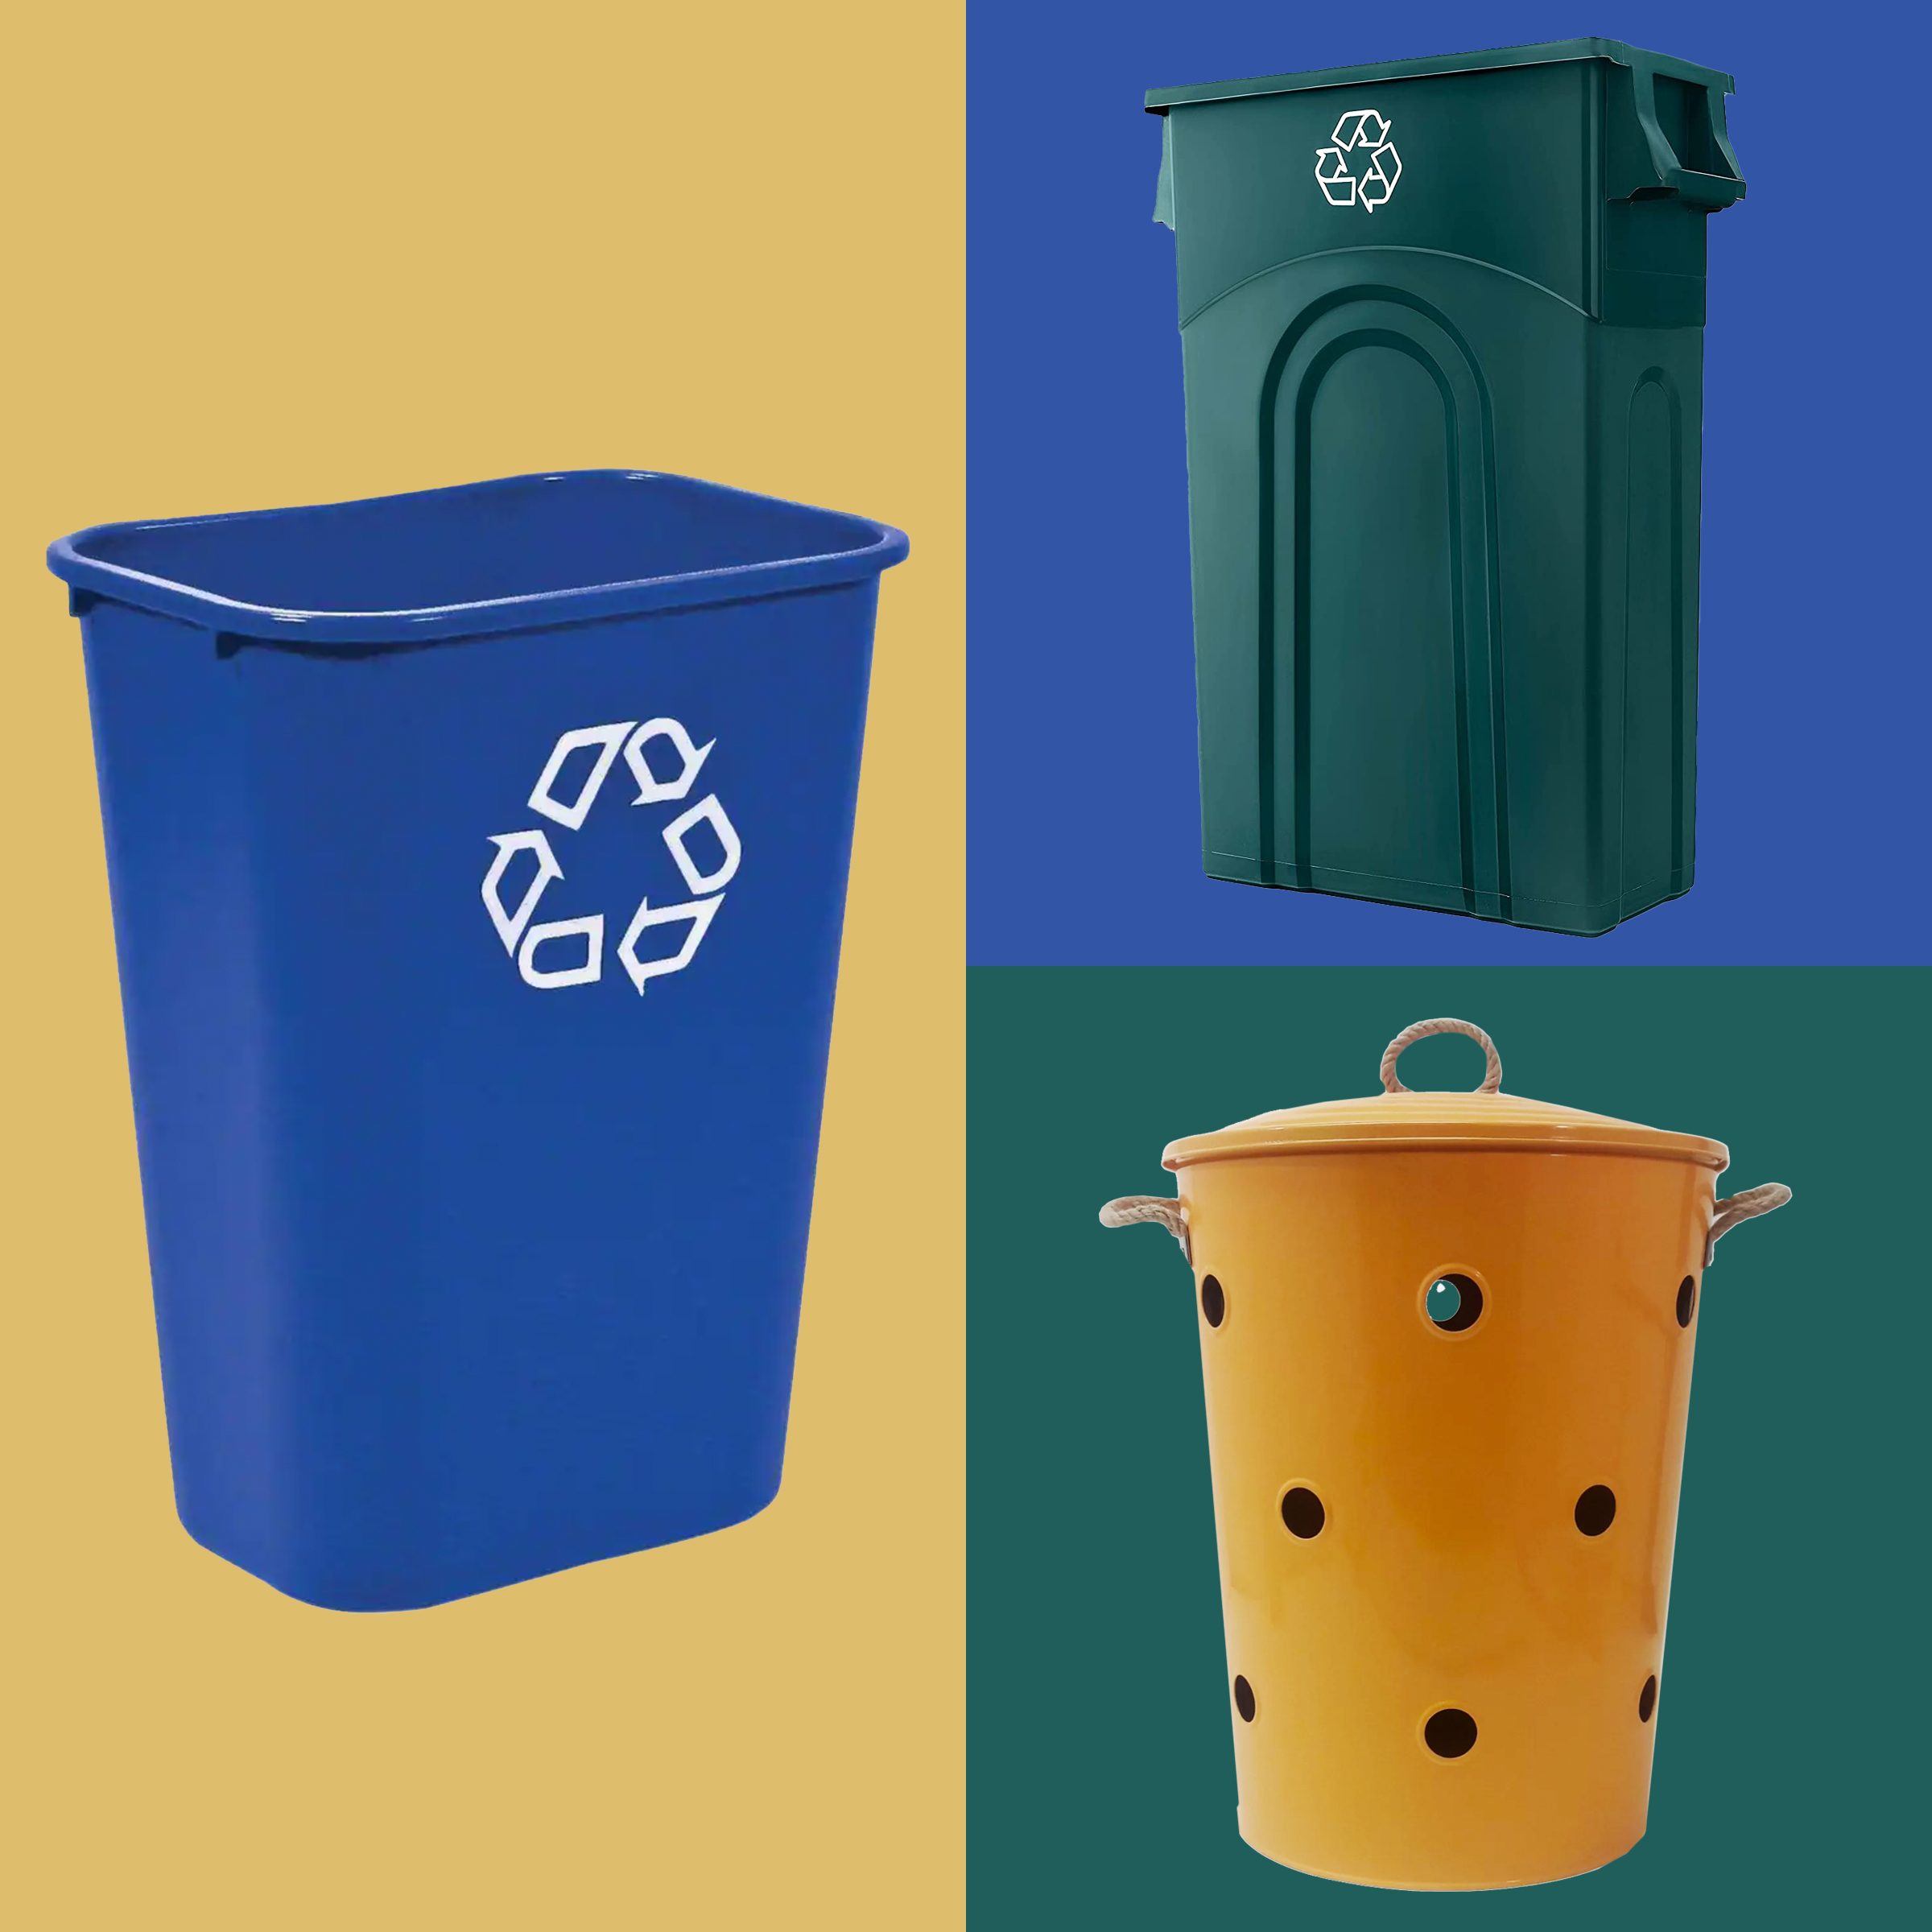 9 Recycled Trash Bags For A Green(er) Garbage Can